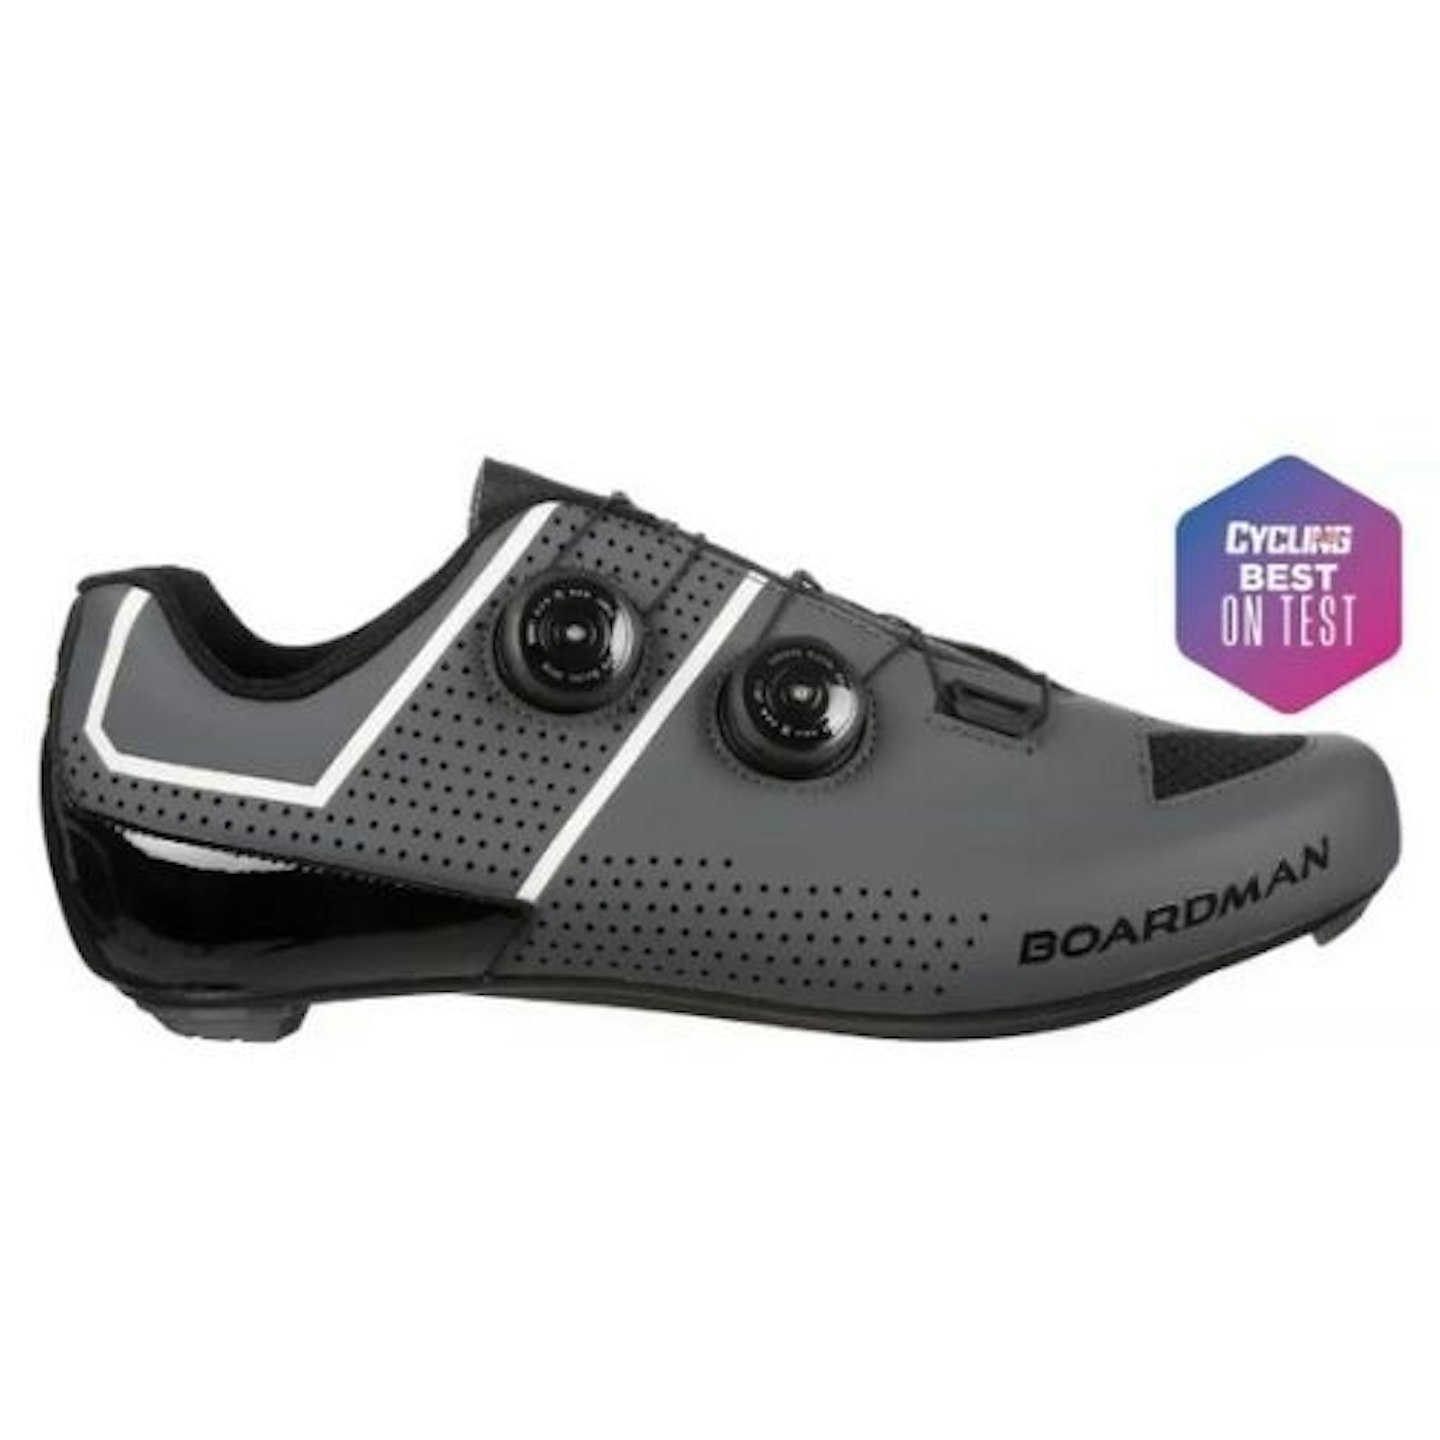 Boardman Carbon Cycle Shoes in Black and Grey